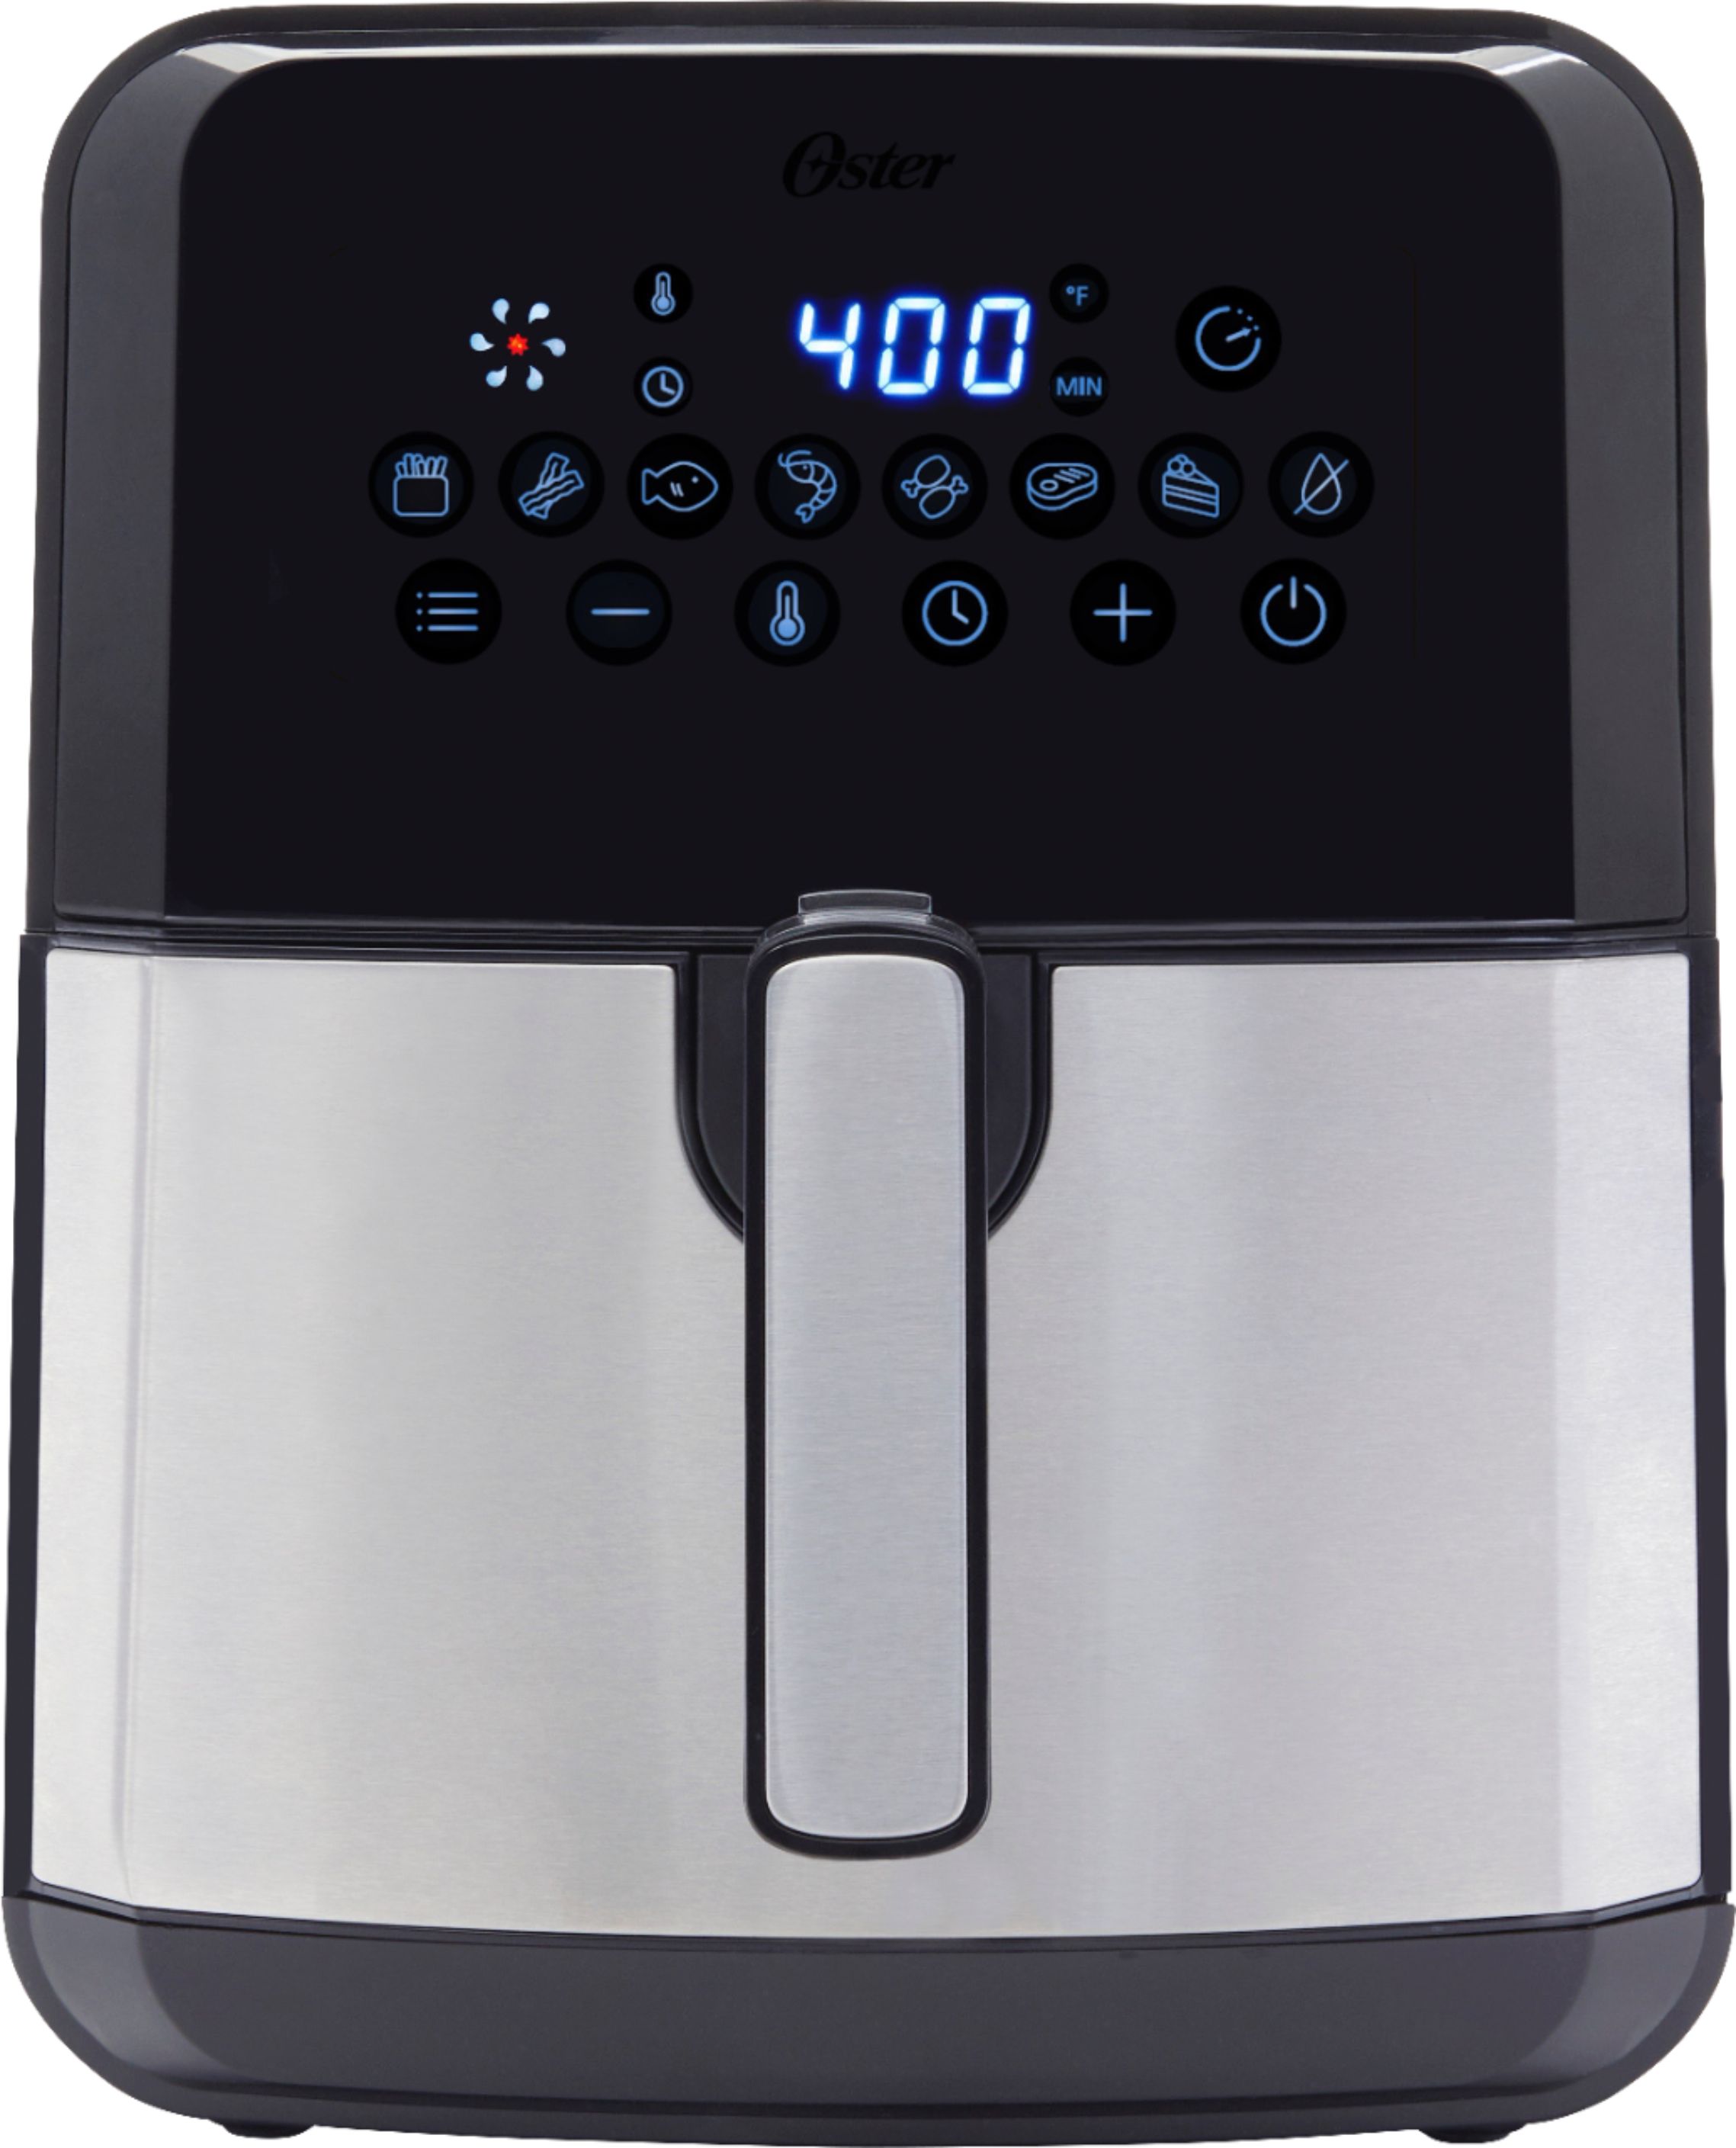 ✓ 5 Best Air Fryer with Stainless Steel Basket To Buy in 2022